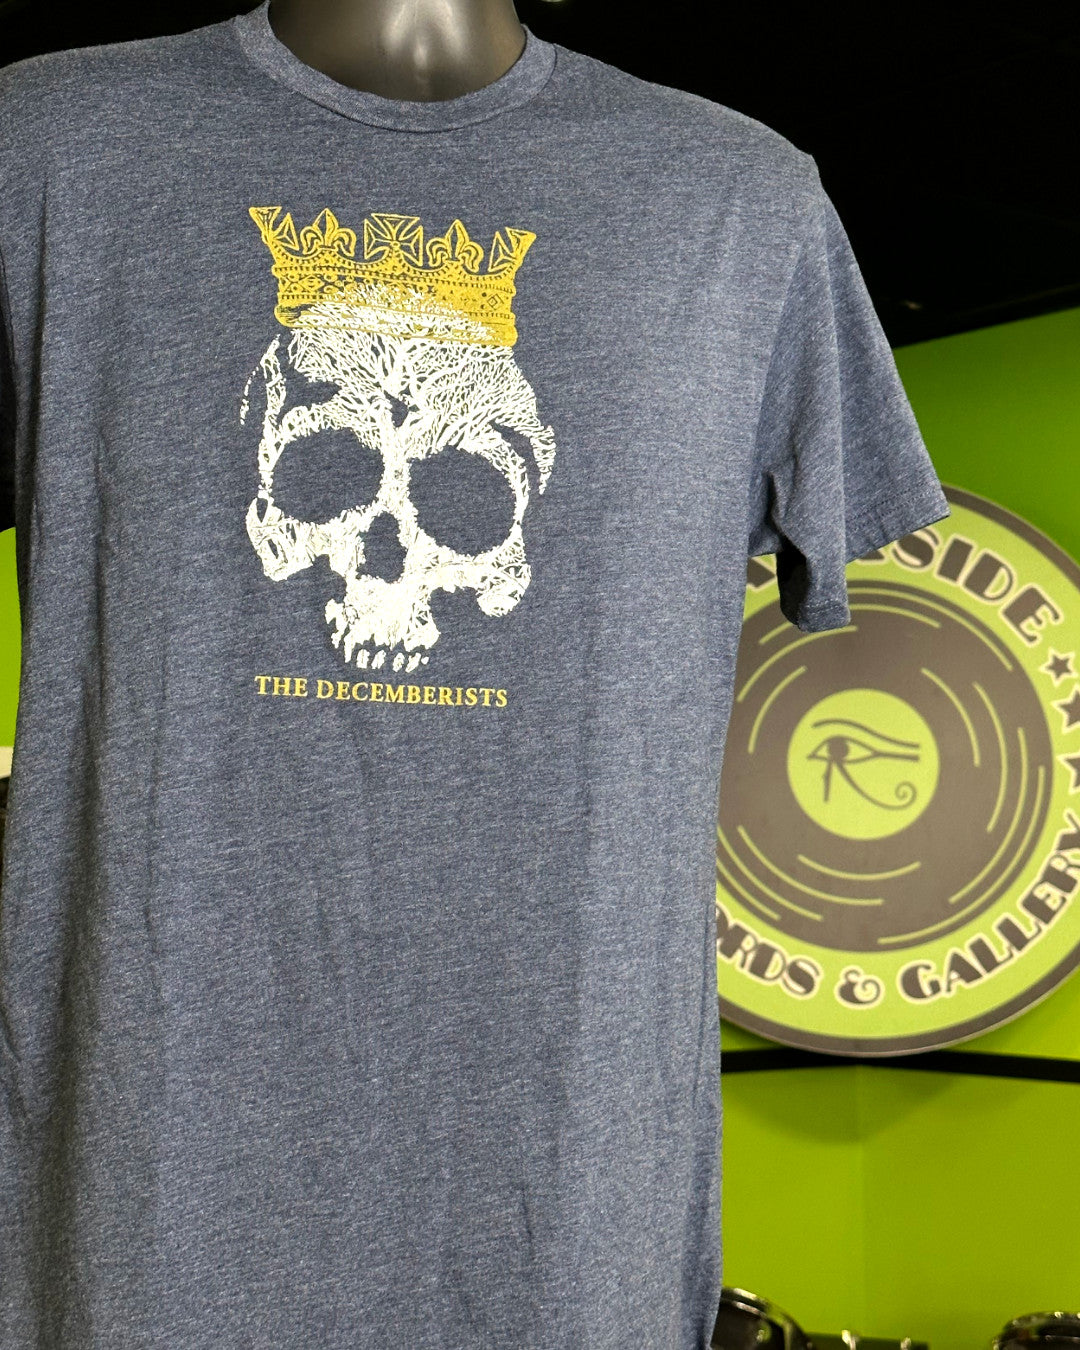 The Decemberists Skull w/Crown Graphic T-Shirt, Light Blue, L - Darkside Records